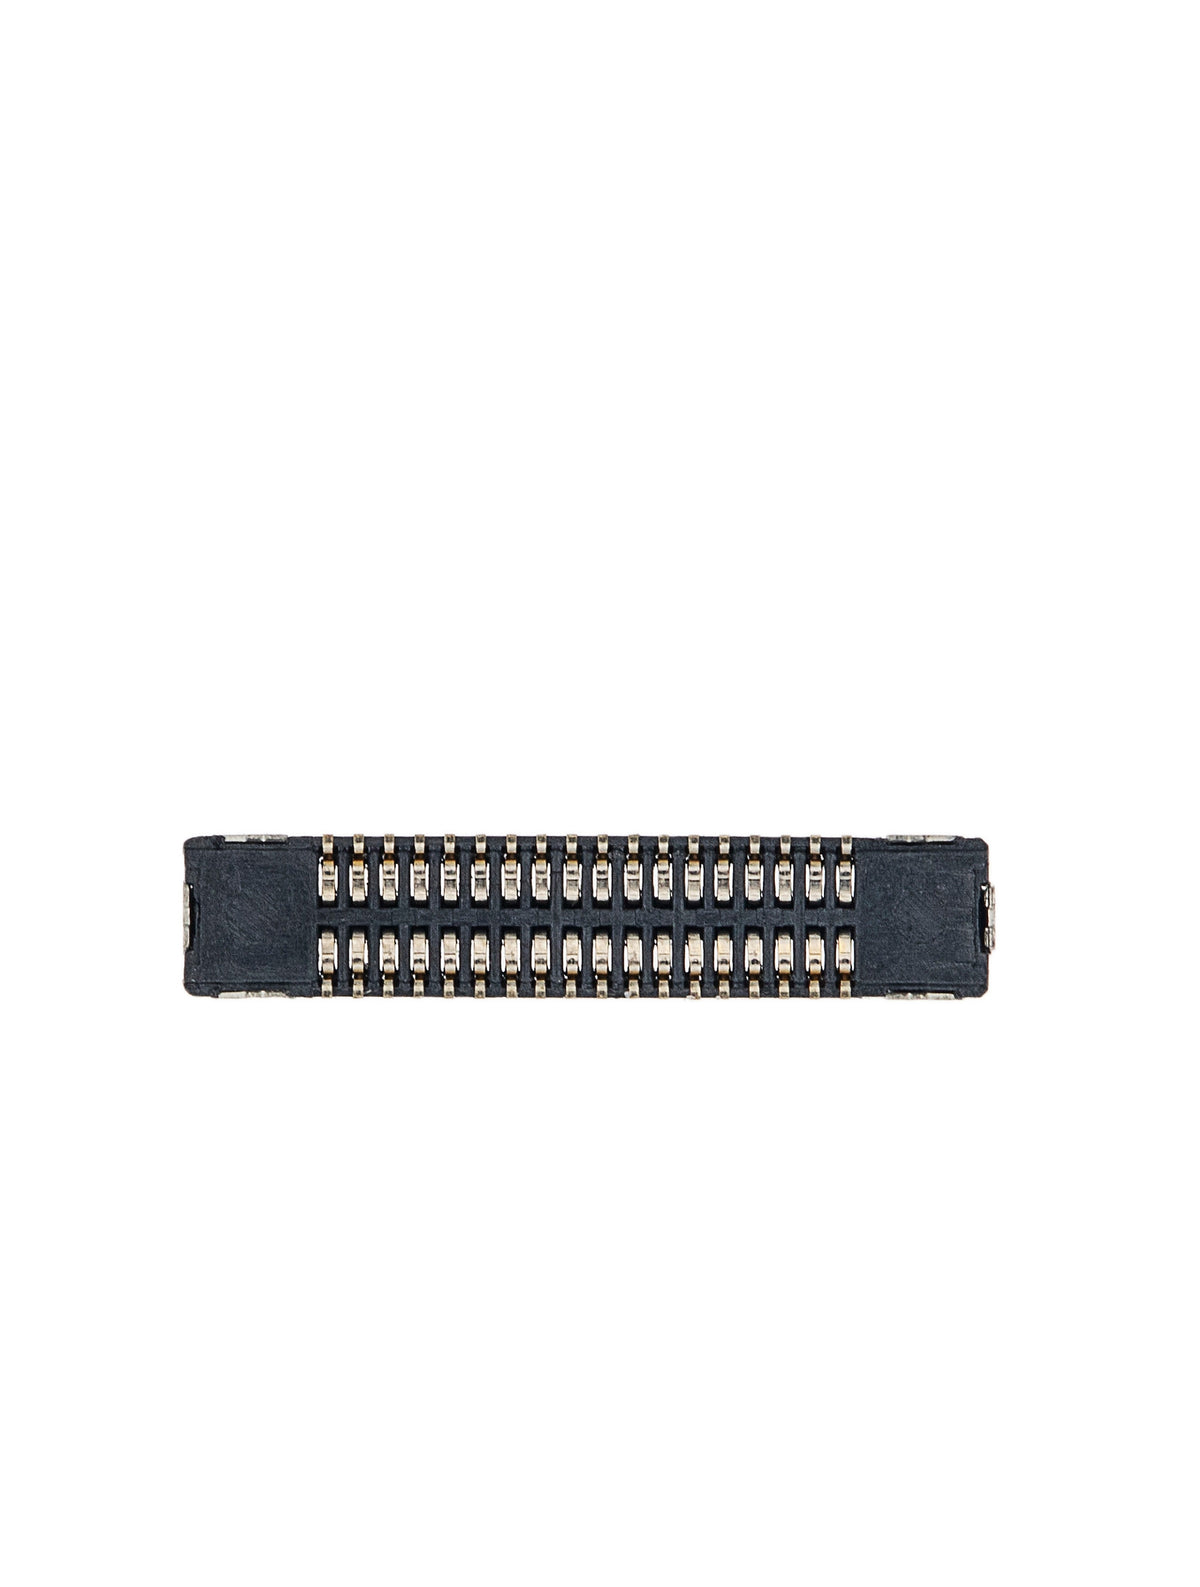 DIGITIZER (ON THE MOTHERBOARD) FPC CONNECTOR (36 PIN) FOR IPAD 6